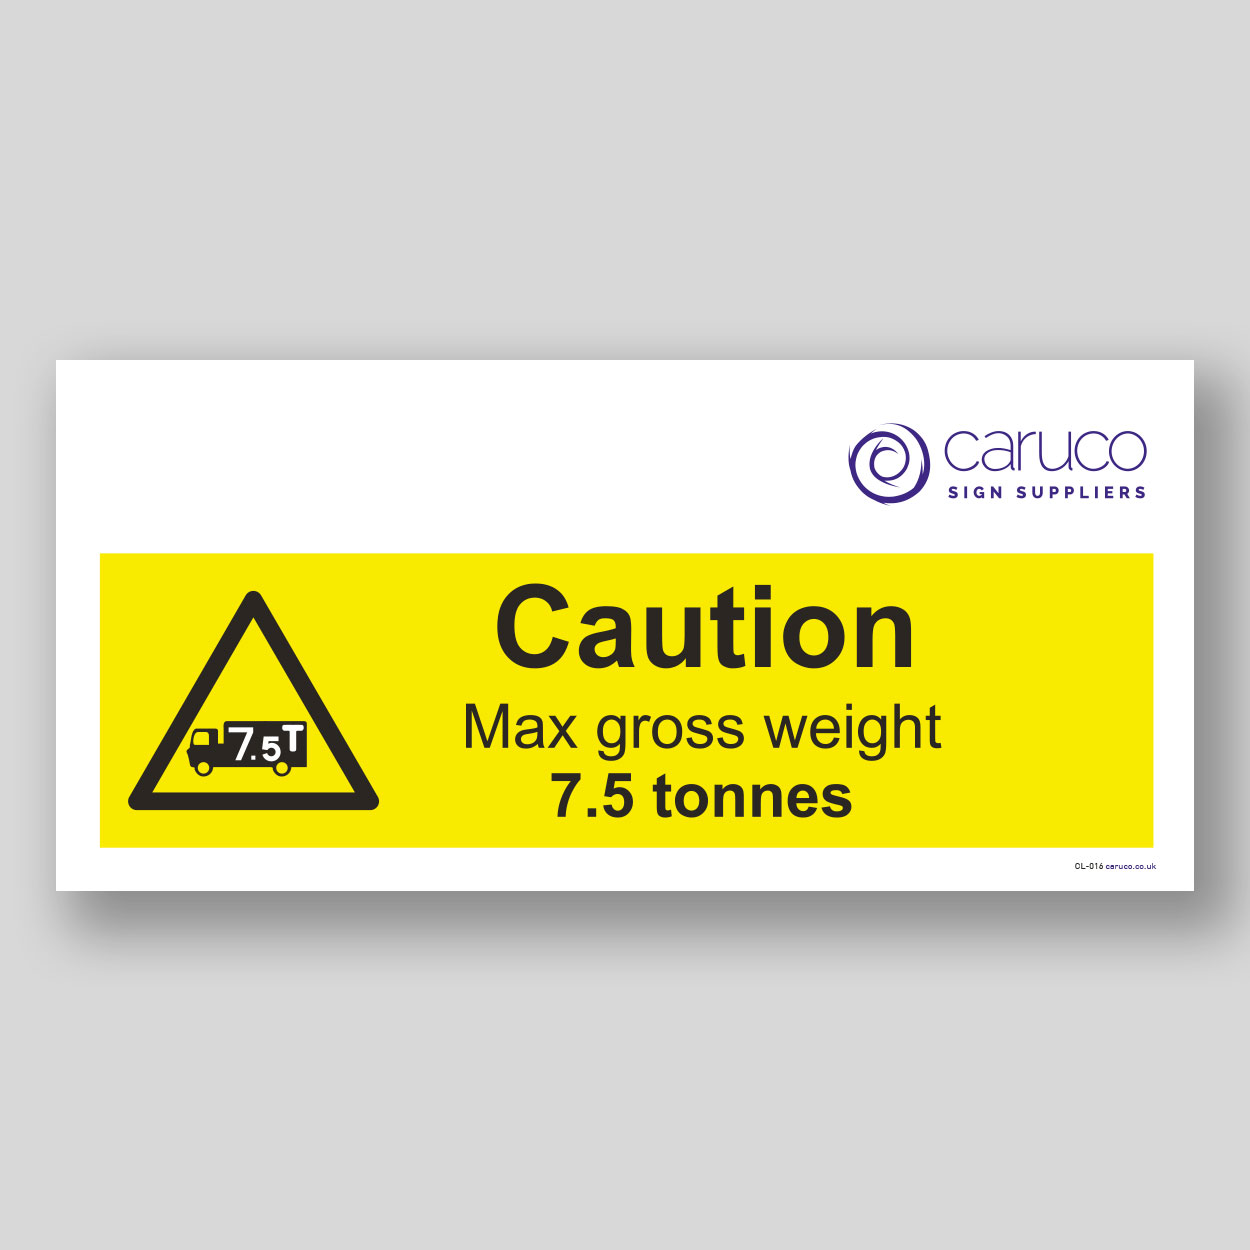 CL-016 Caution - max weight 7.5 tonnes